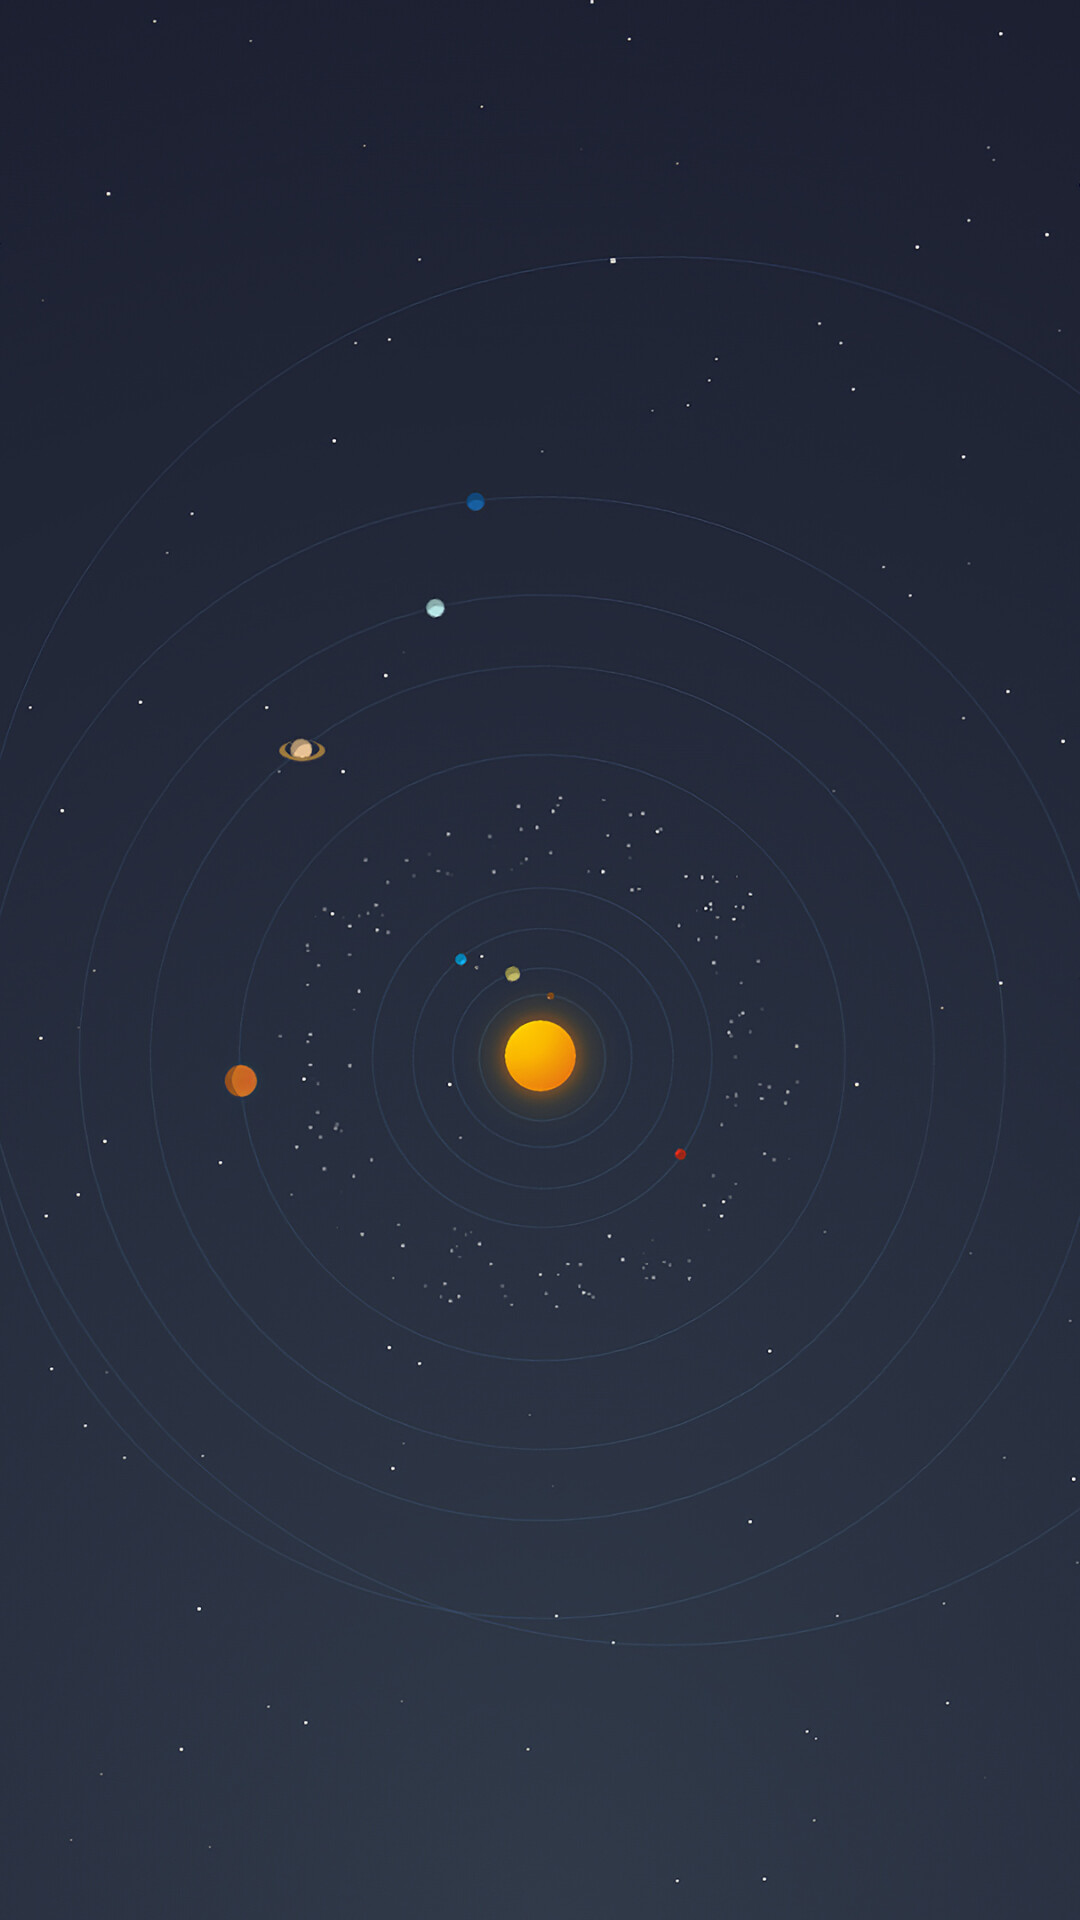 Solar System: The Sun and the planets formed together 4.6 billion years ago. 1080x1920 Full HD Wallpaper.